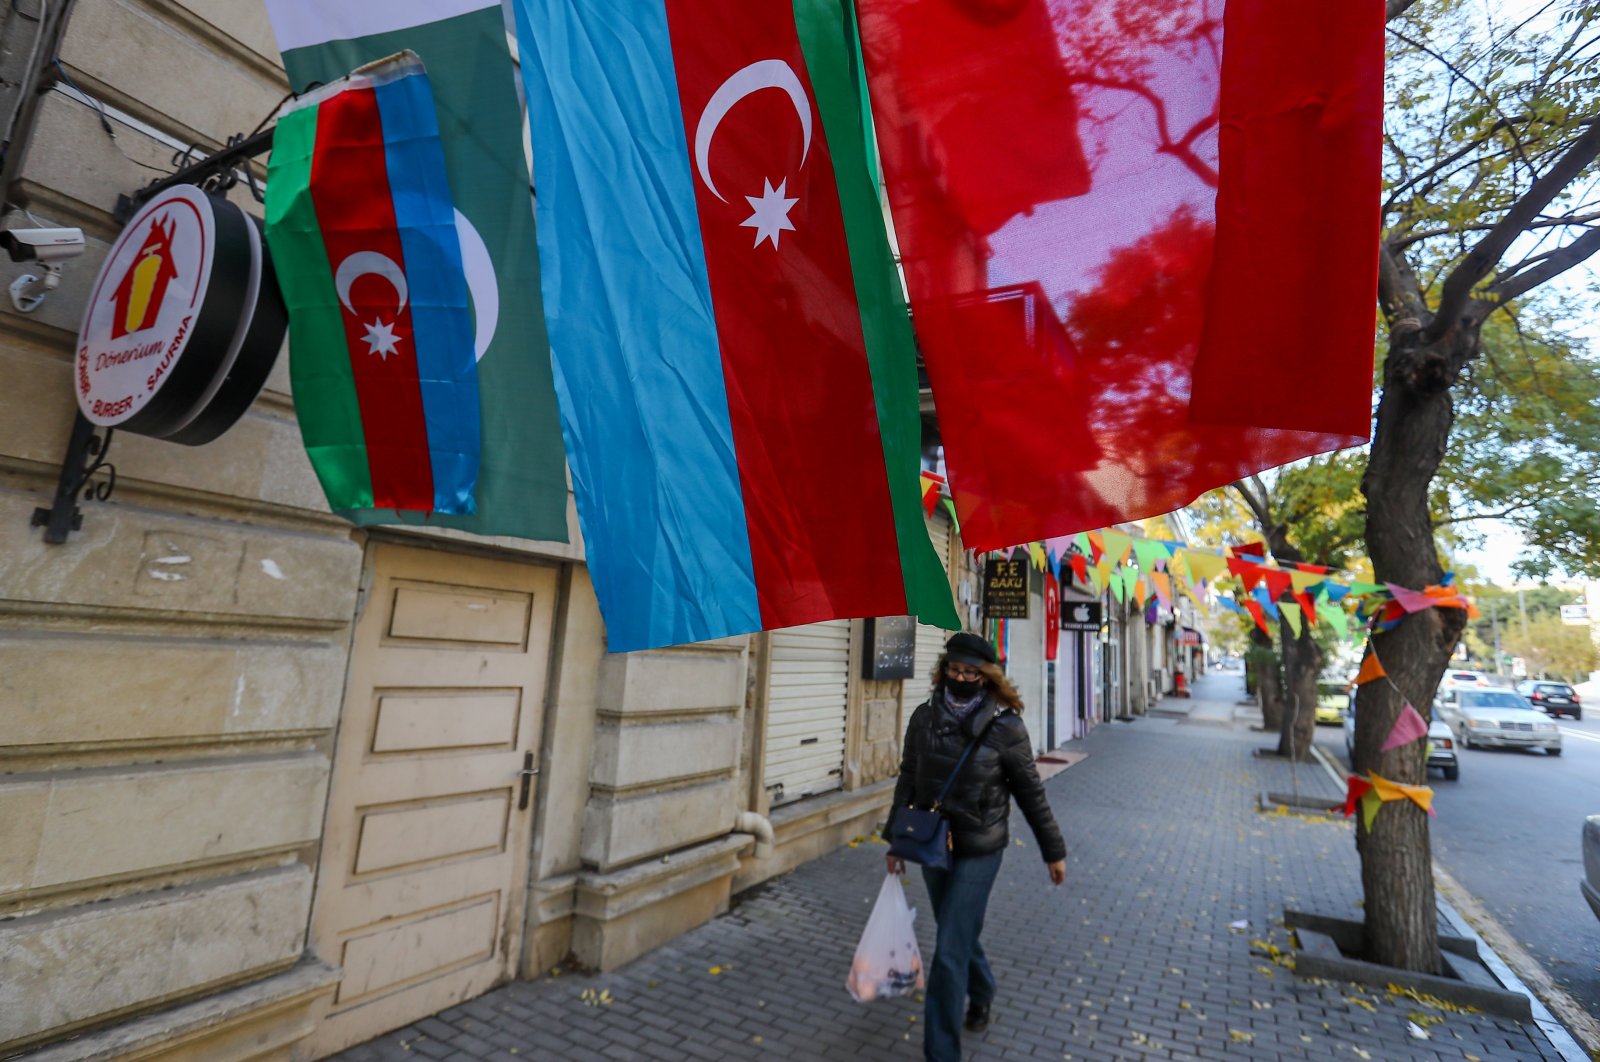 A woman walks under the flags of Azerbaijan and Turkey, which decorate the street in Baku, Azerbaijan, Nov. 28, 2020. (Photo by Getty Images)